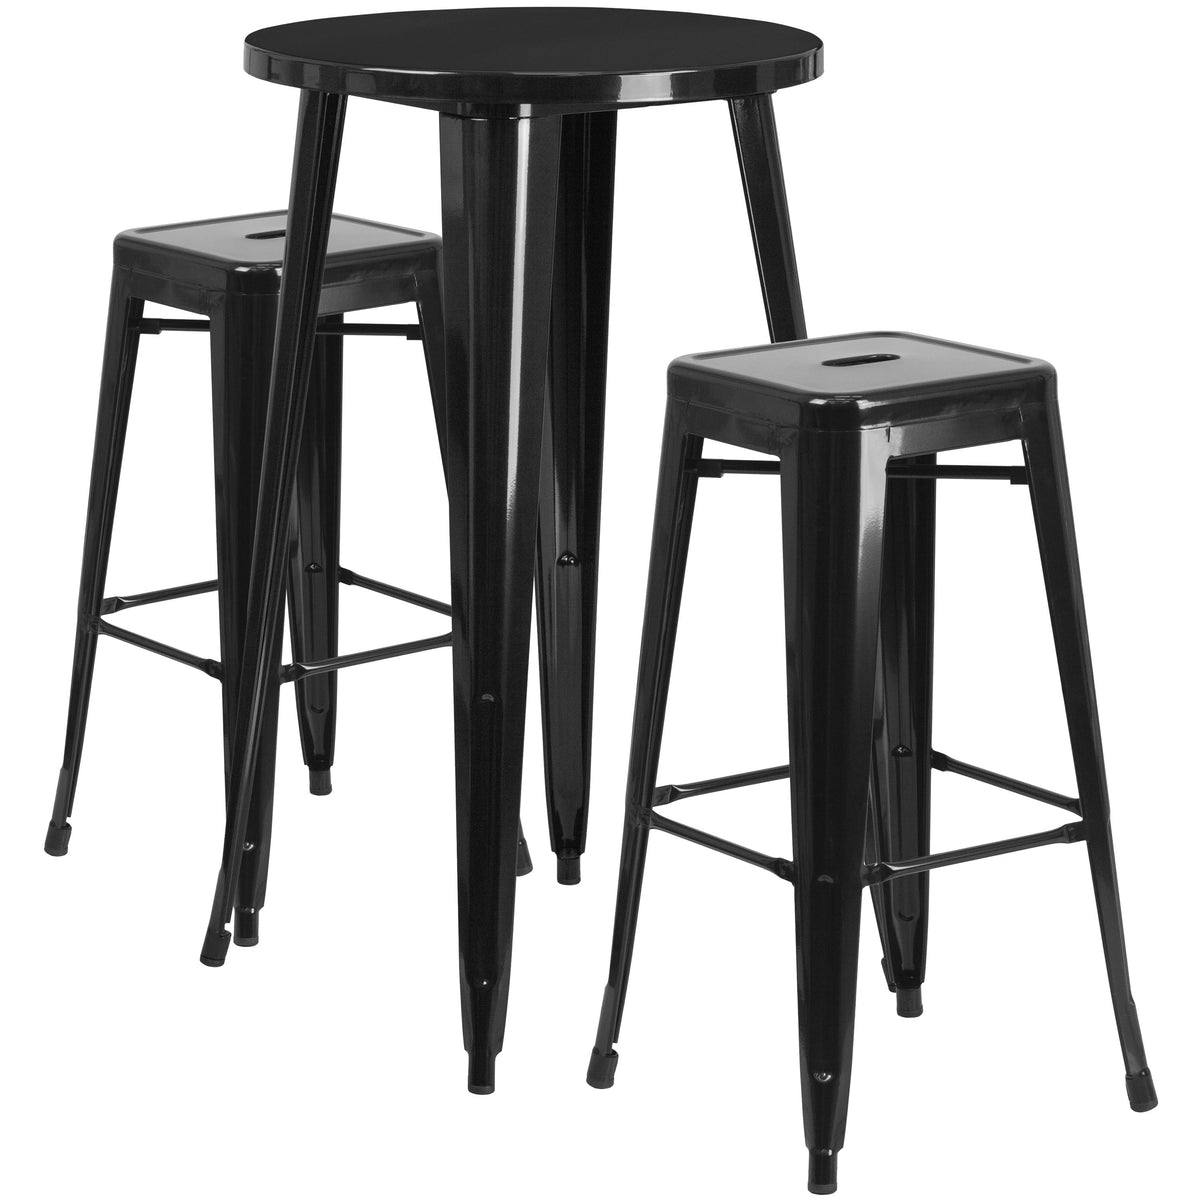 Black |#| 24inch Round Black Metal Indoor-Outdoor Bar Table Set with 2 Backless Stools